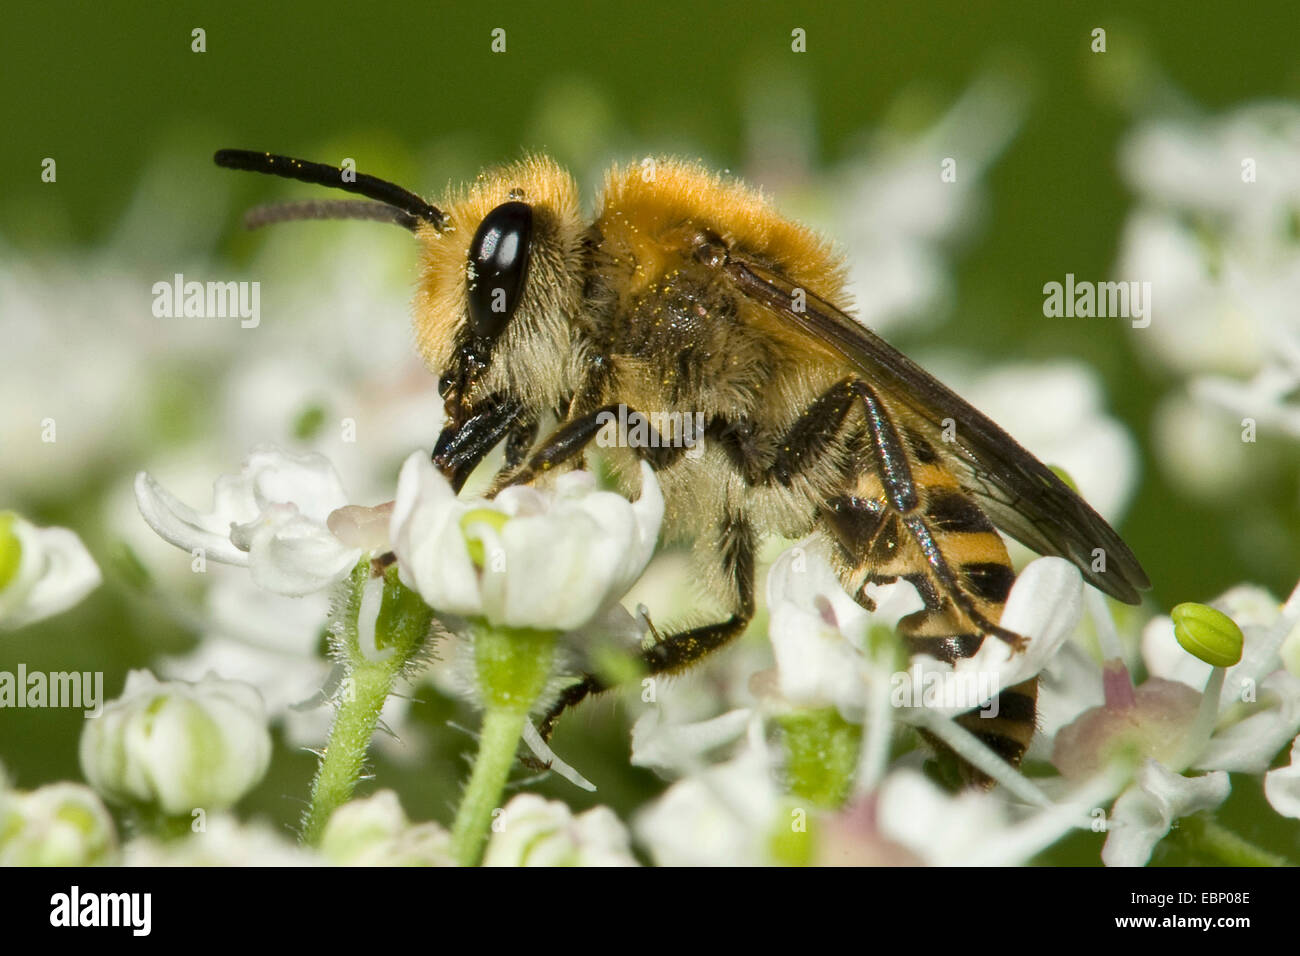 Ivy Bee (Colletes hederae), sui fiori bianchi, Germania Foto Stock